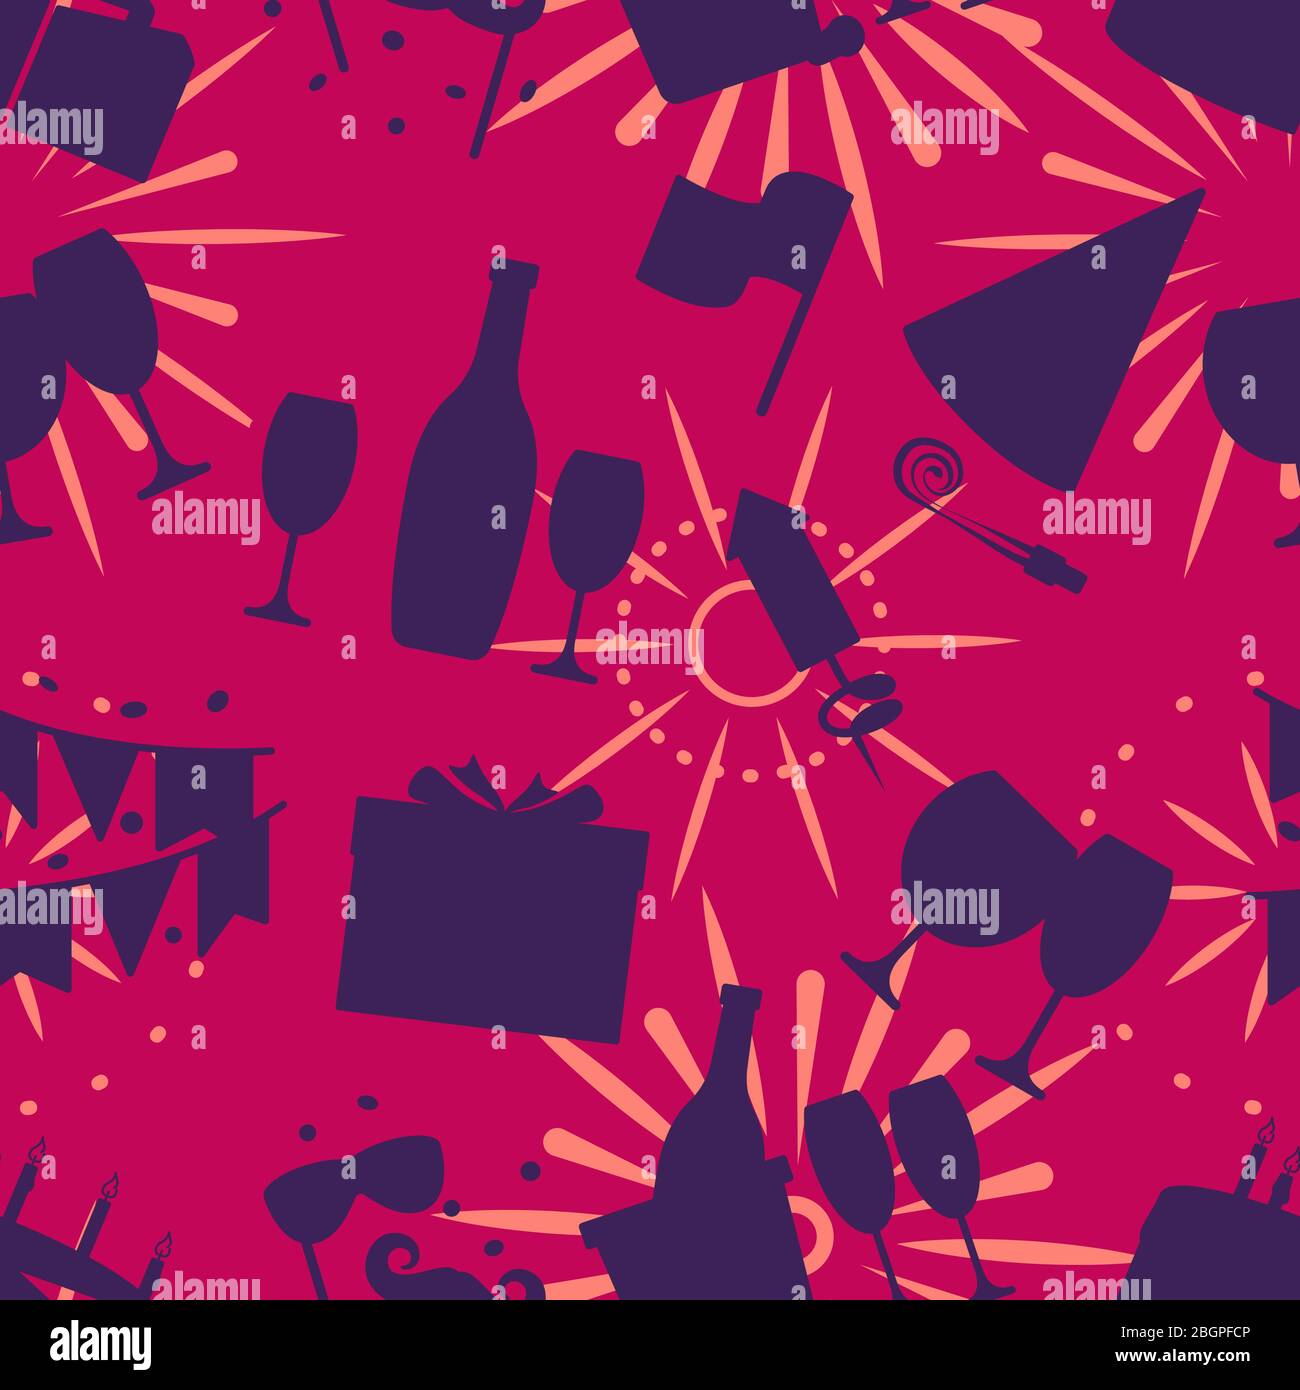 Celebration seamless pattern with fireworks drinks giftbox silhouette vector Stock Vector